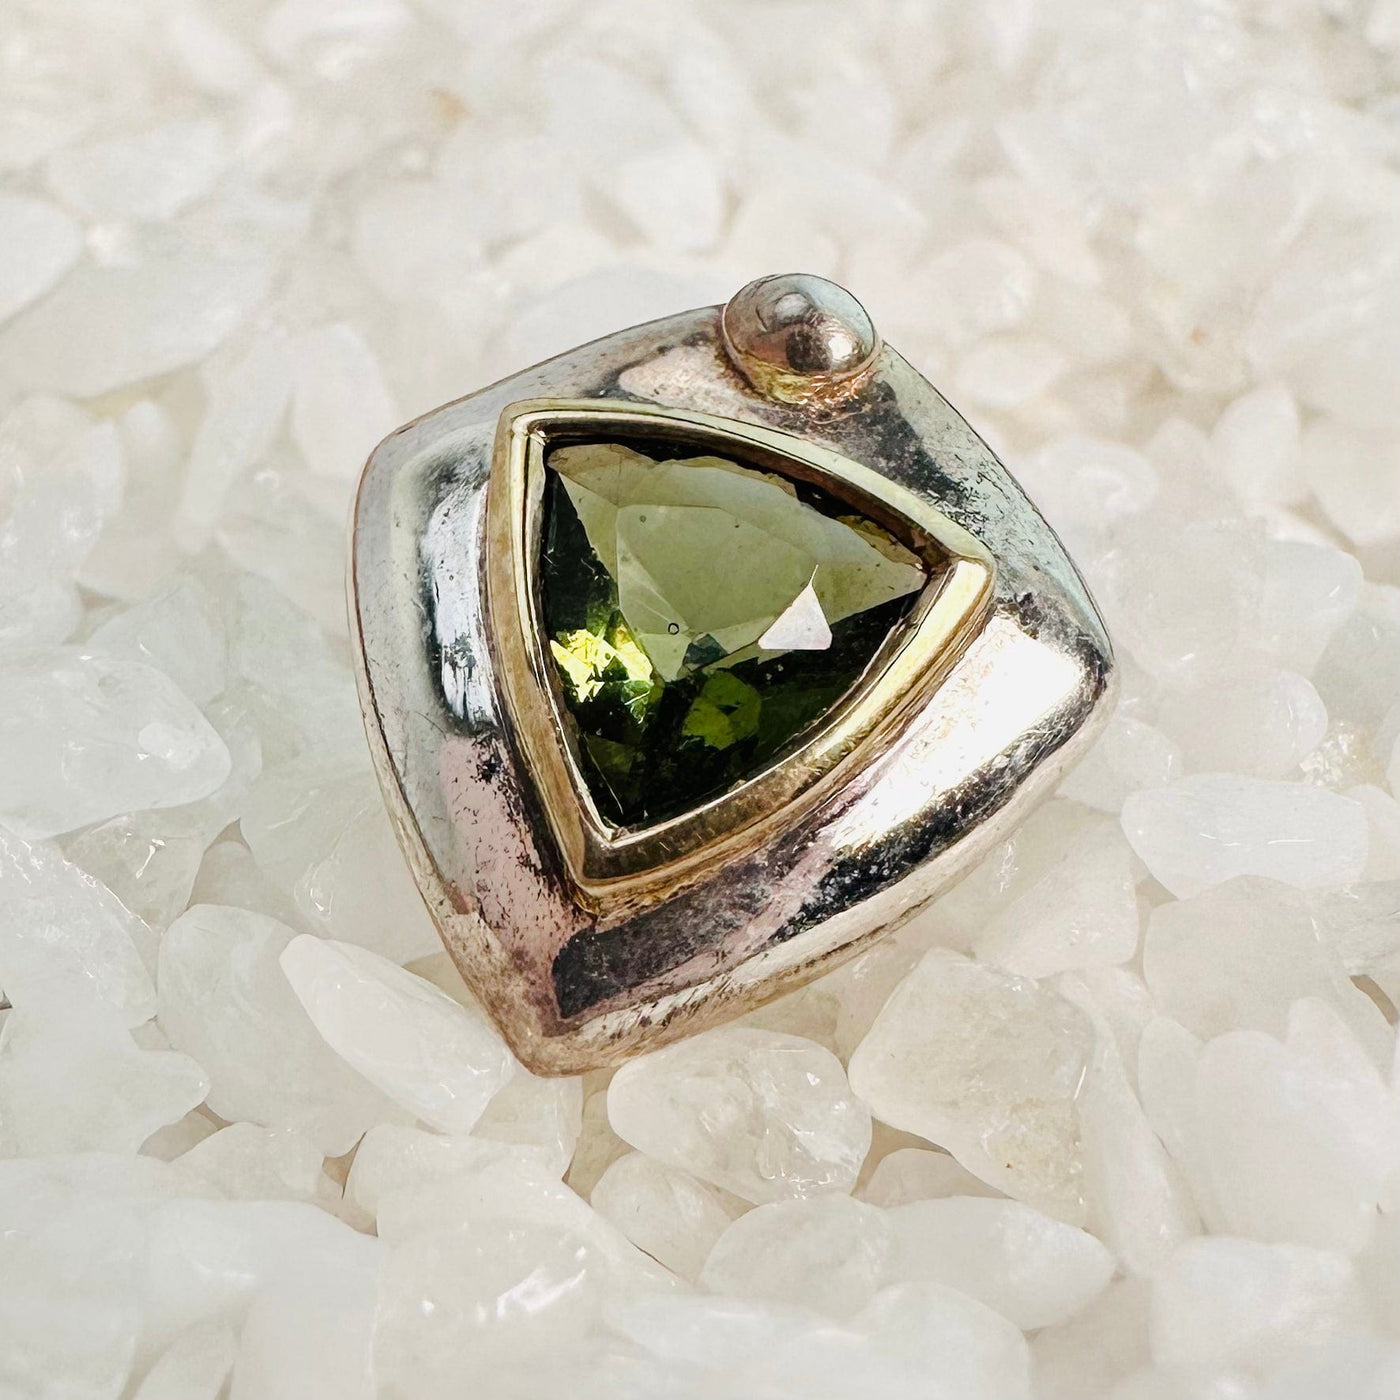 Up close view of one Moldavite earring on top of crystal quartz chips.